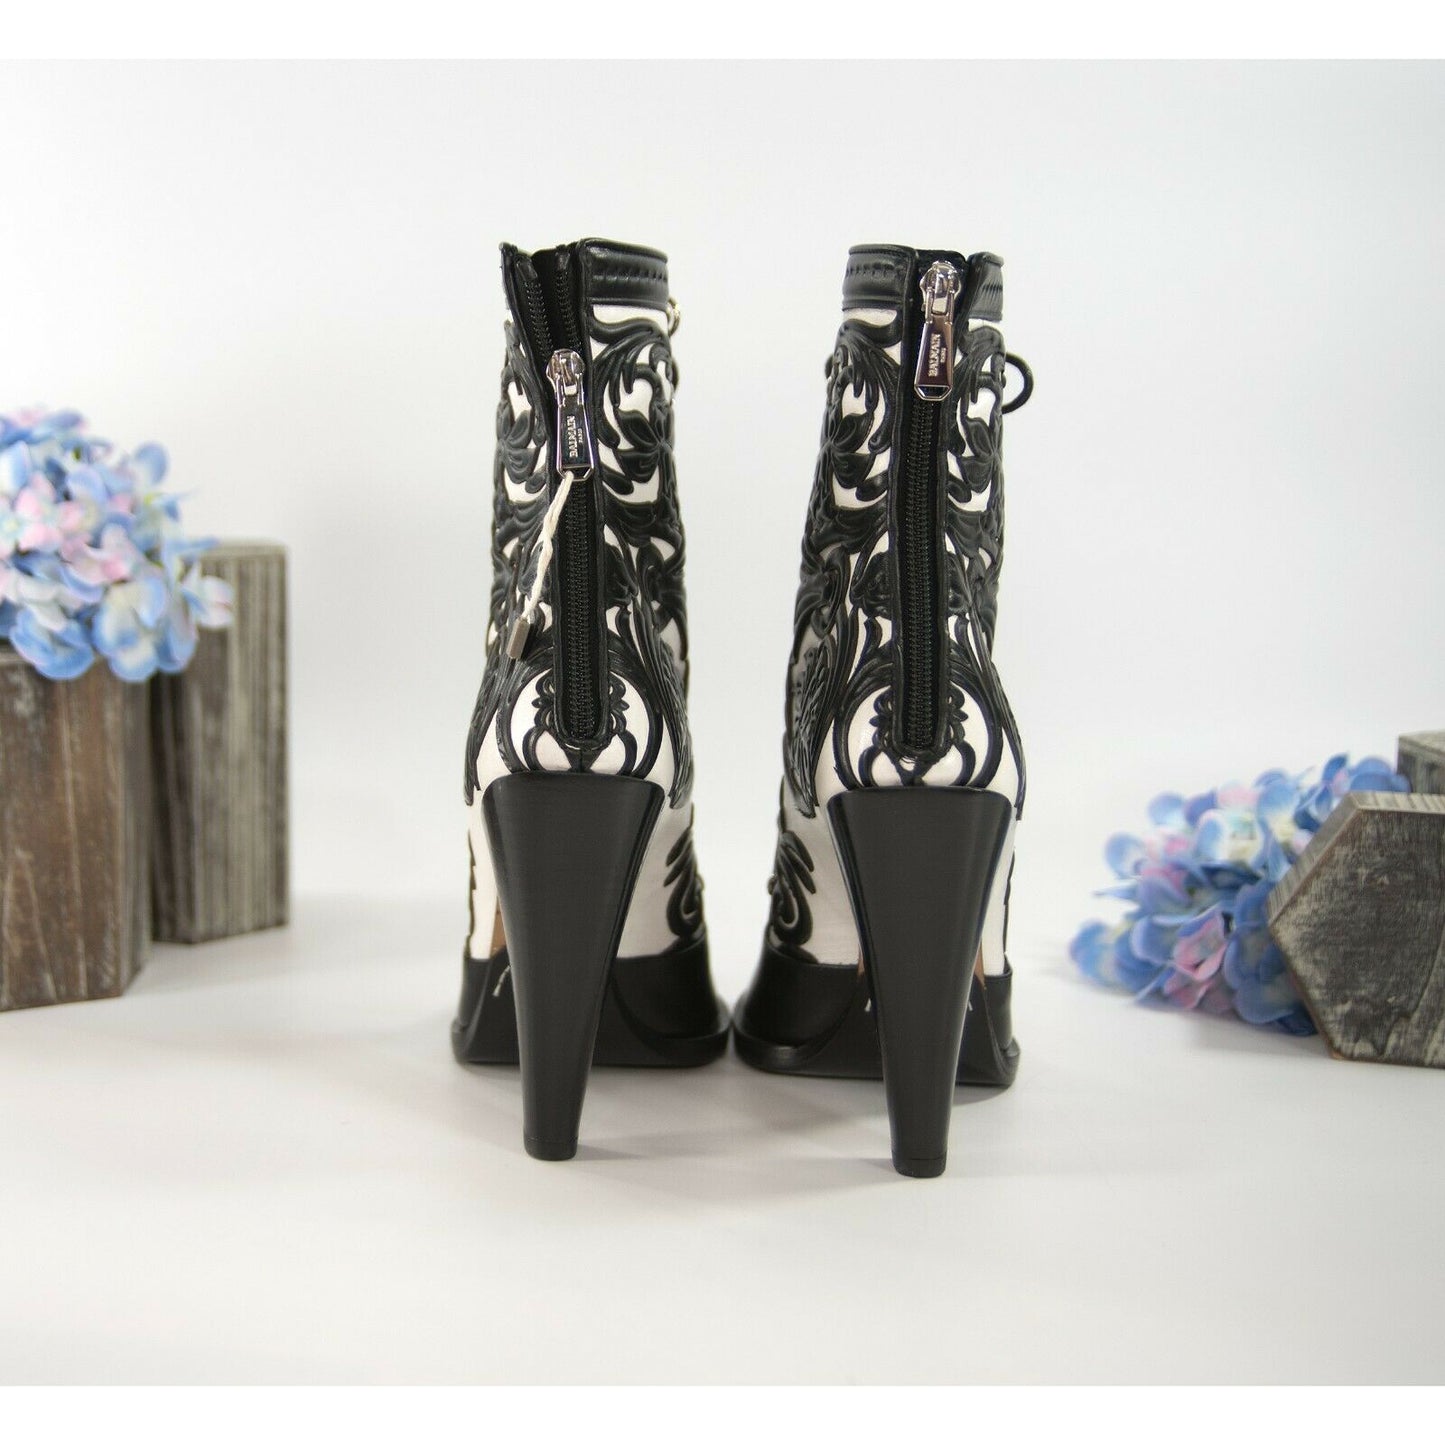 Balmain Black White Floral Tooled Leather Lace Up Bootie Boots Size 37 NIB